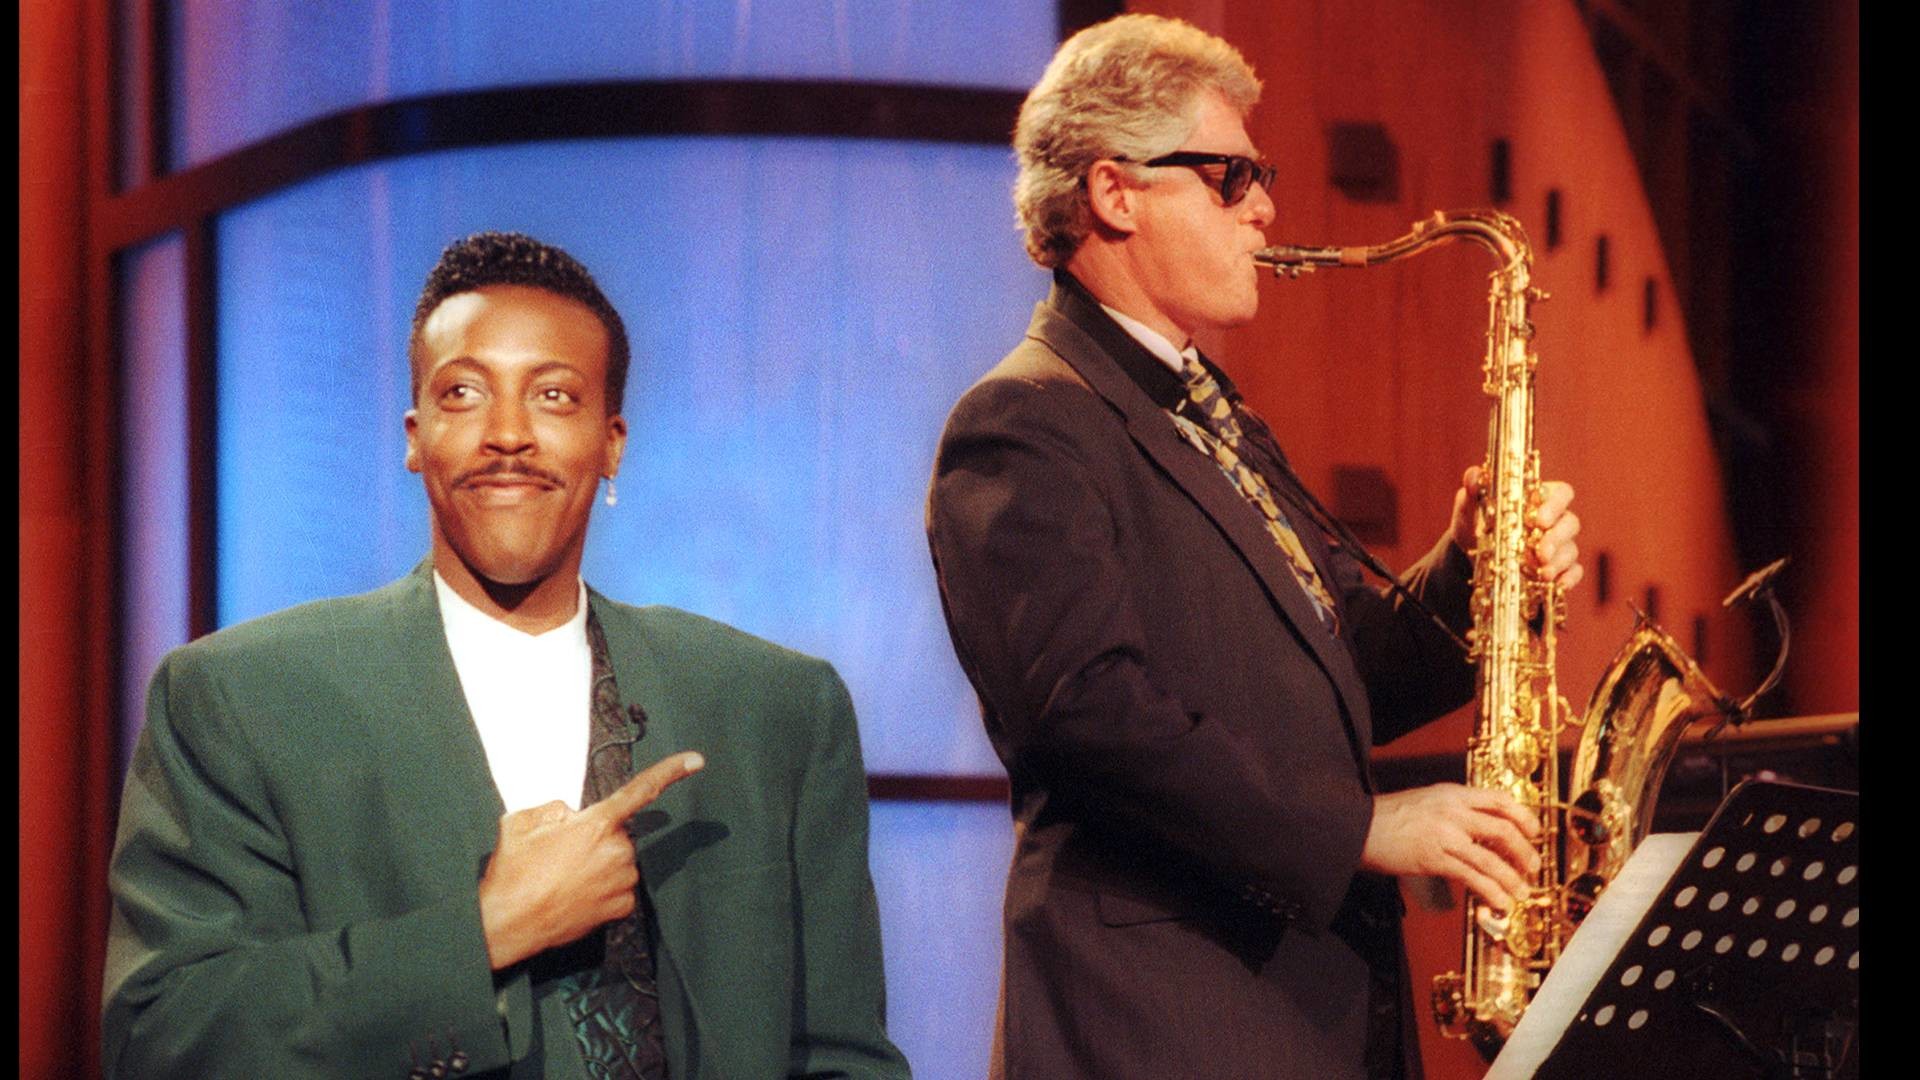 Bill Clinton playing the sax on the Arsenio Hall show 1992